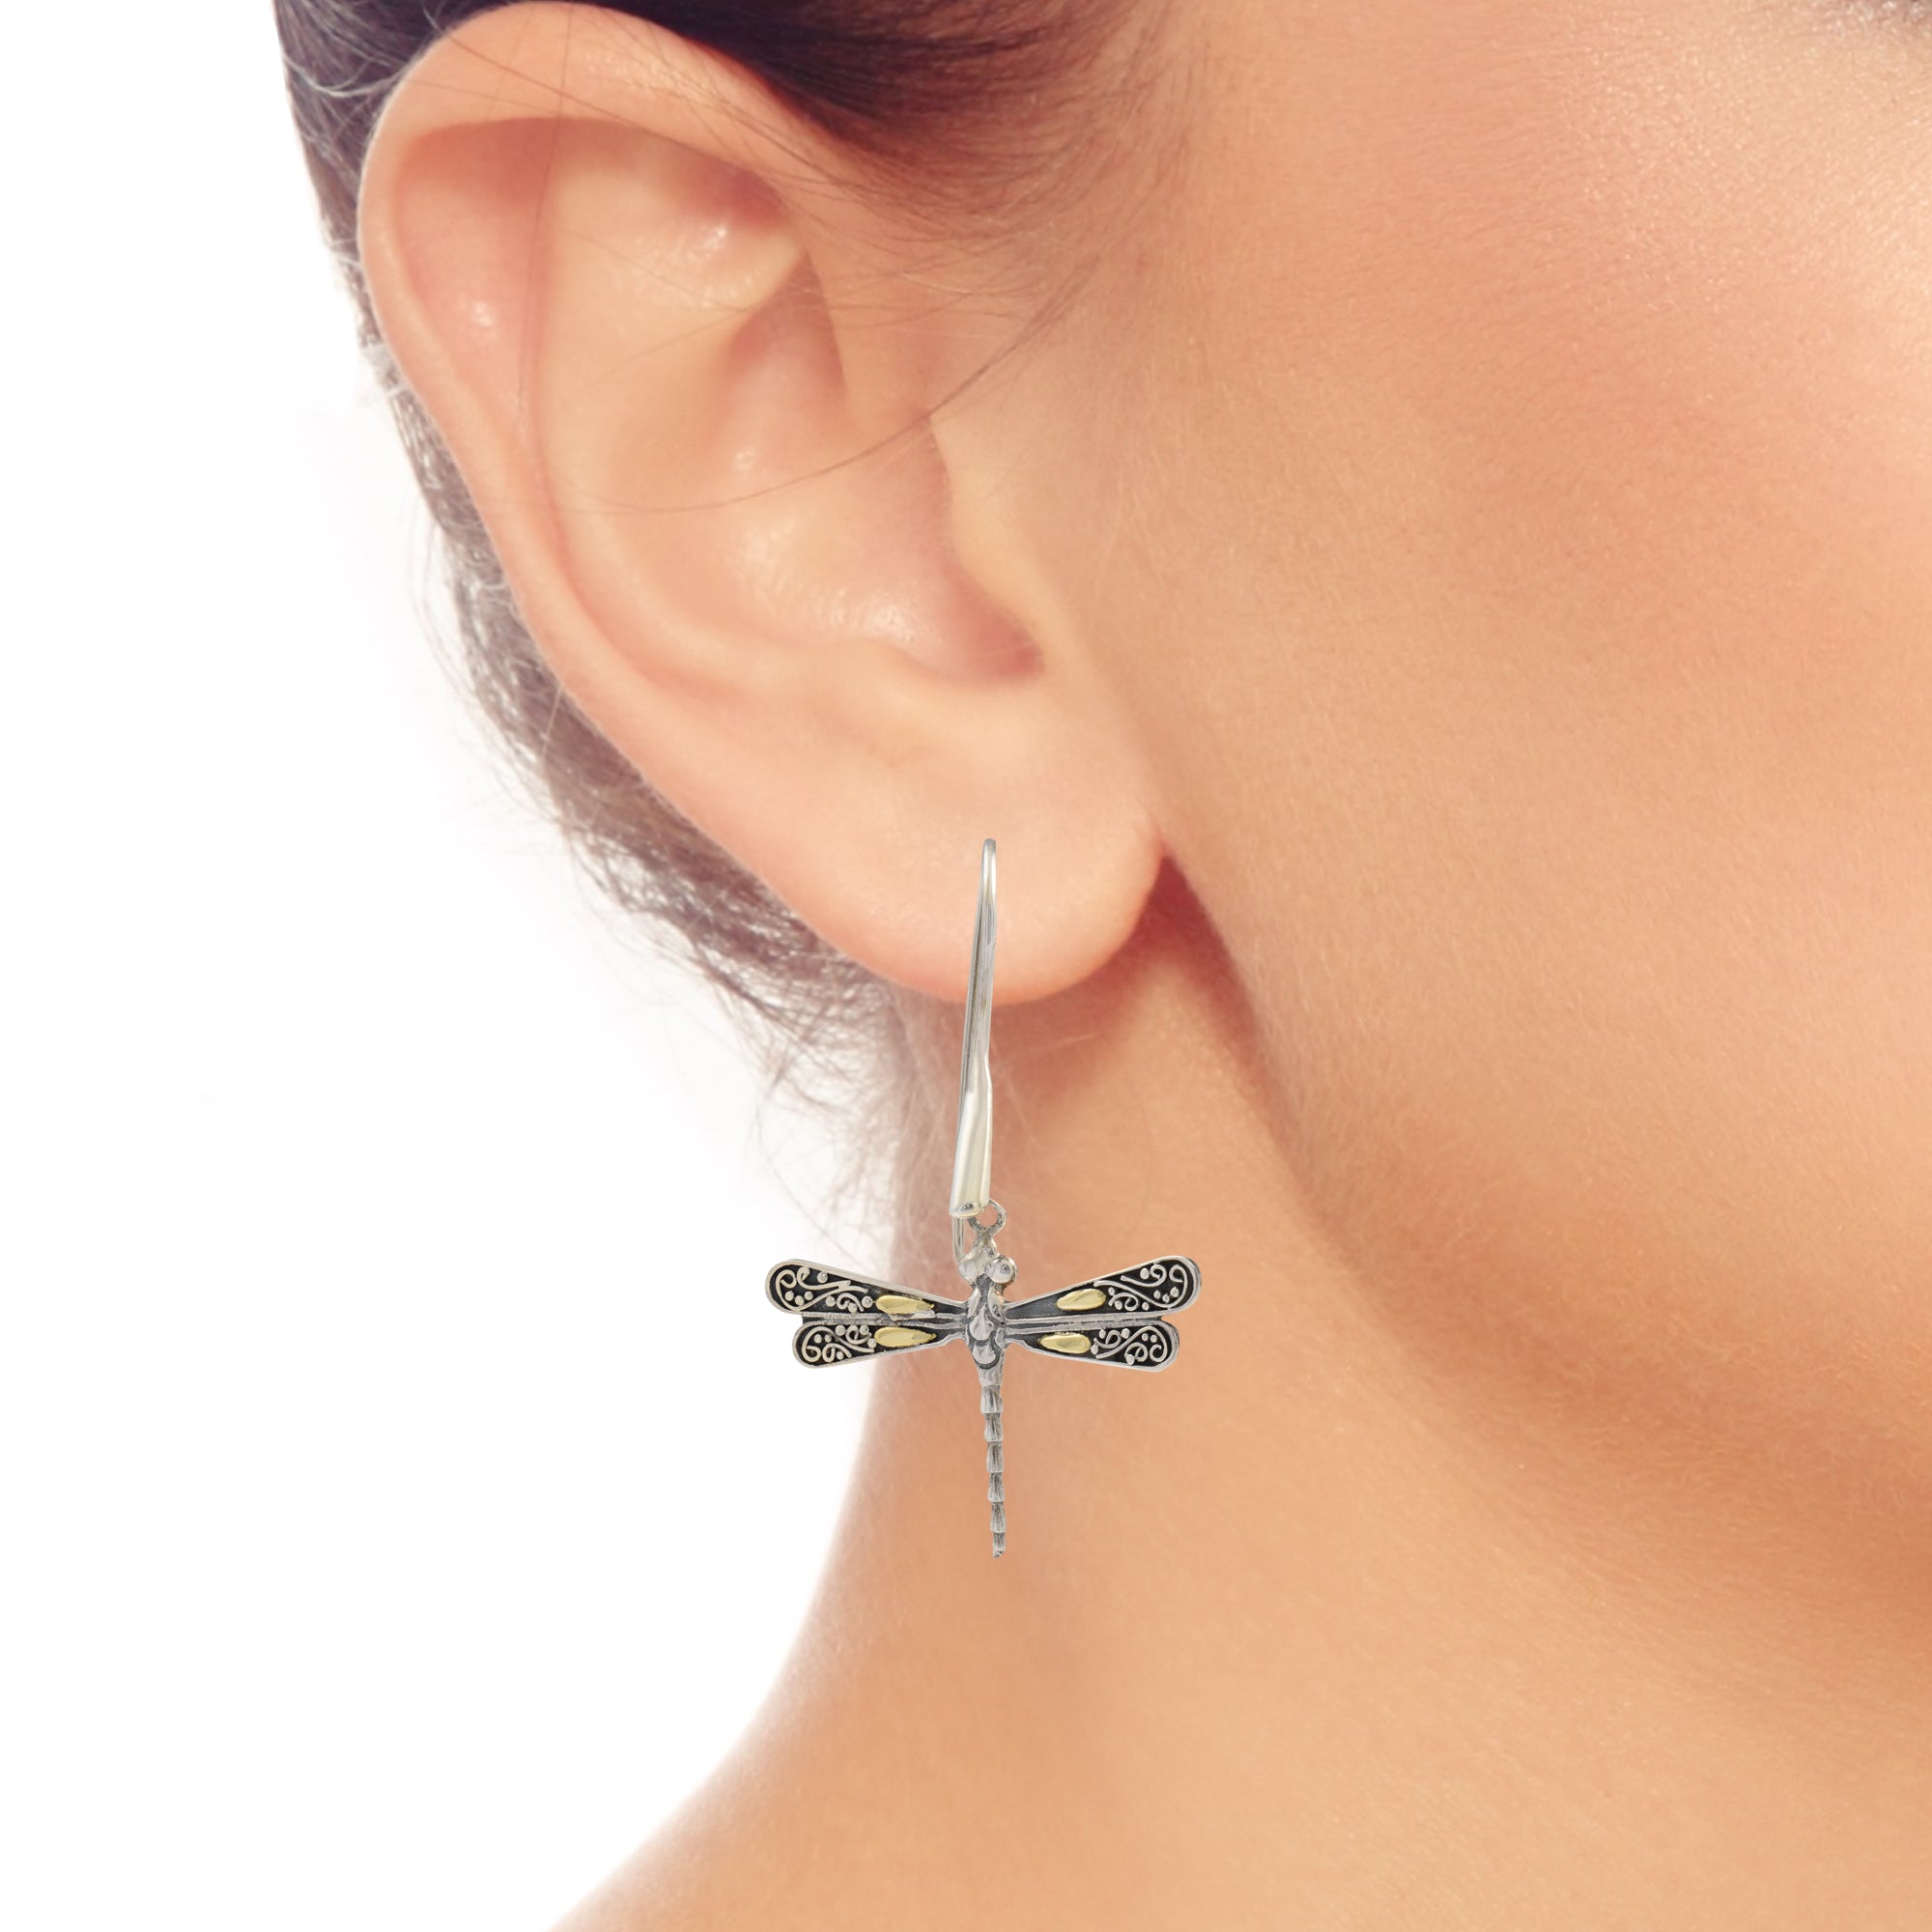 Phillip Gavriel Dragonfly Earrings in Sterling Silver and 18kt Yellow Gold